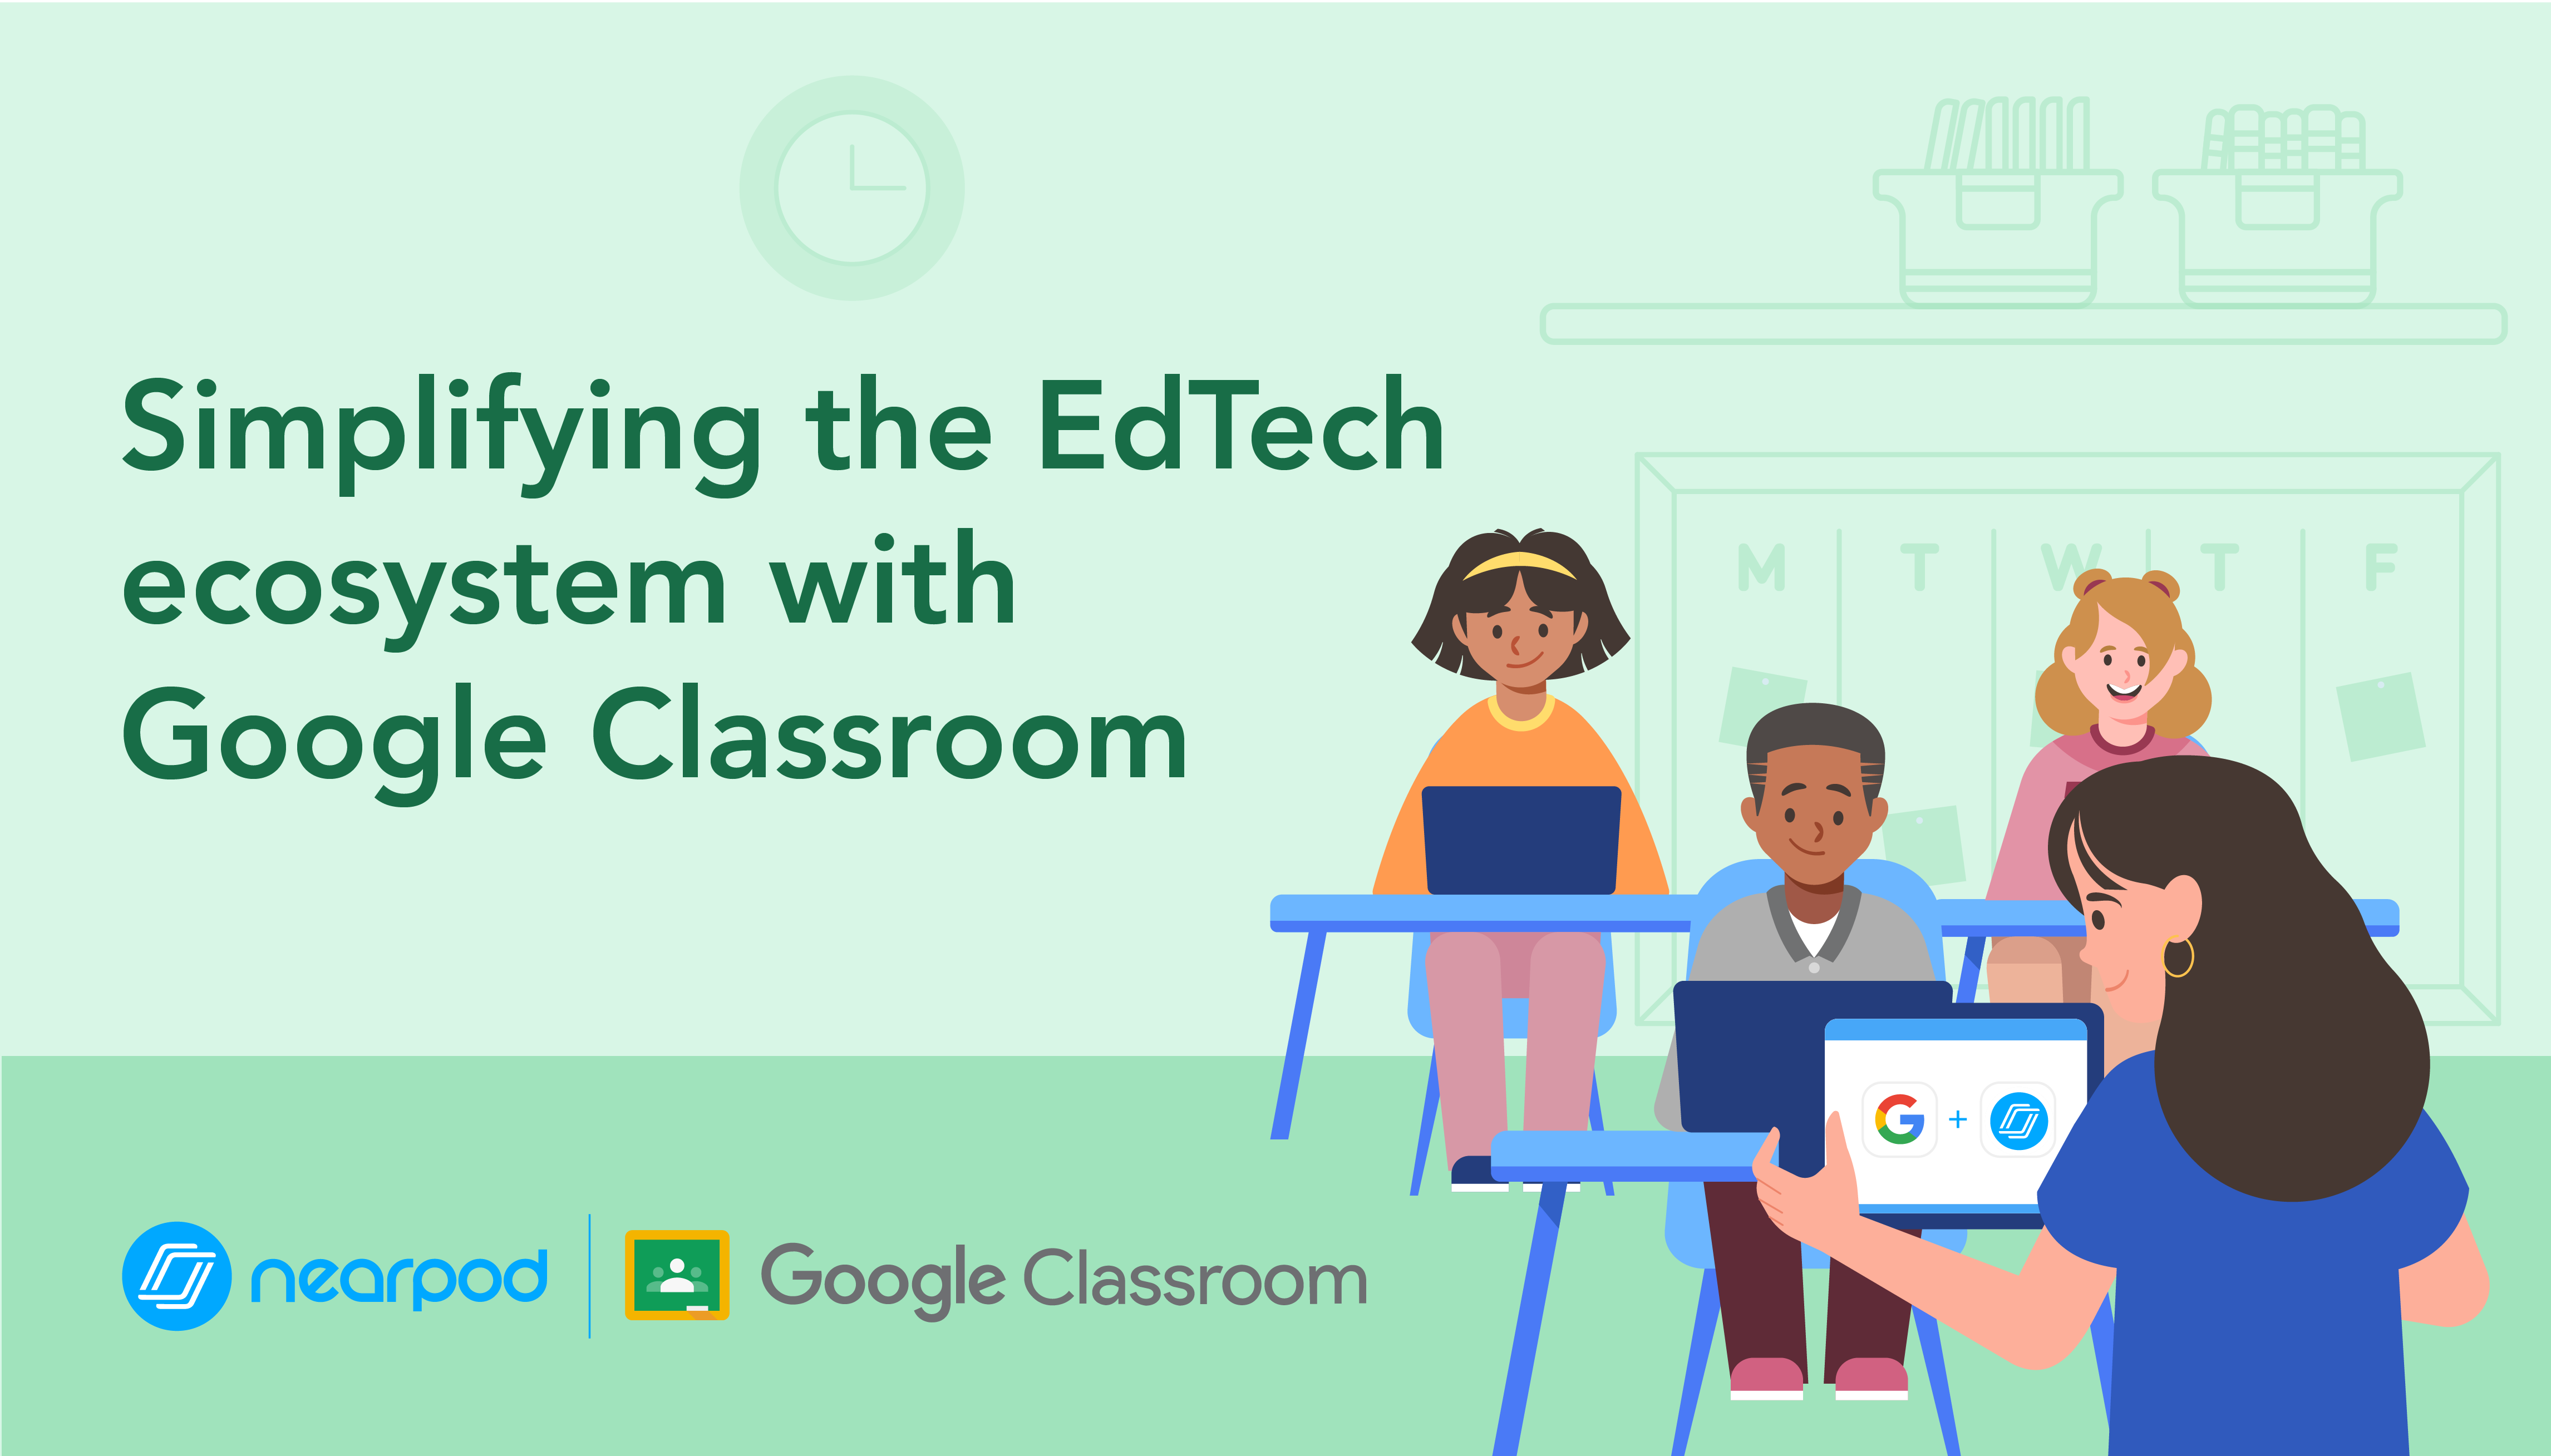 Simplifying the EdTech ecosystem with Google Classroom